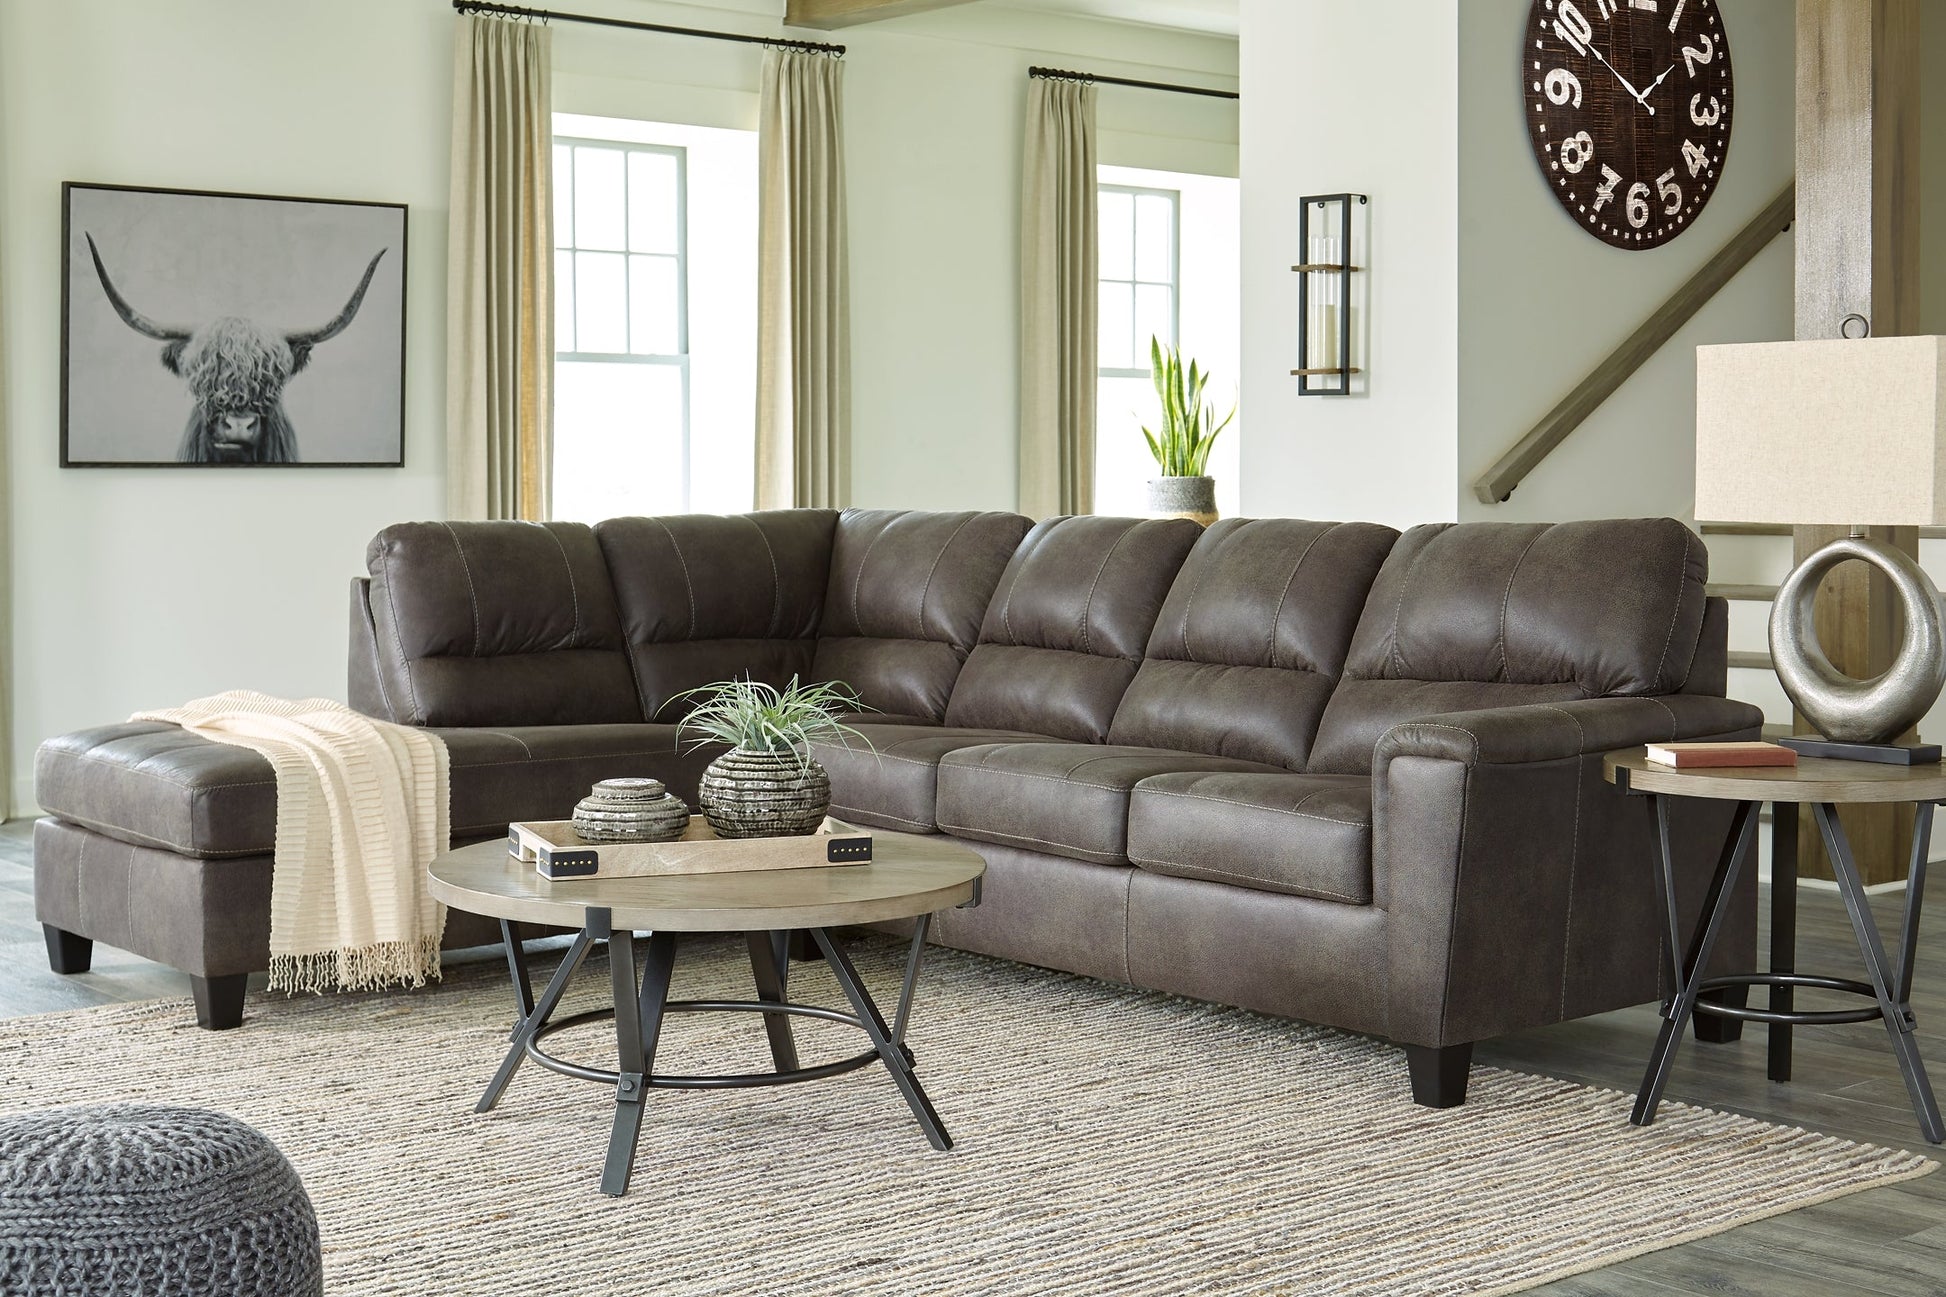 Navi 2-Piece Sleeper Sectional with Chaise at Cloud 9 Mattress & Furniture furniture, home furnishing, home decor